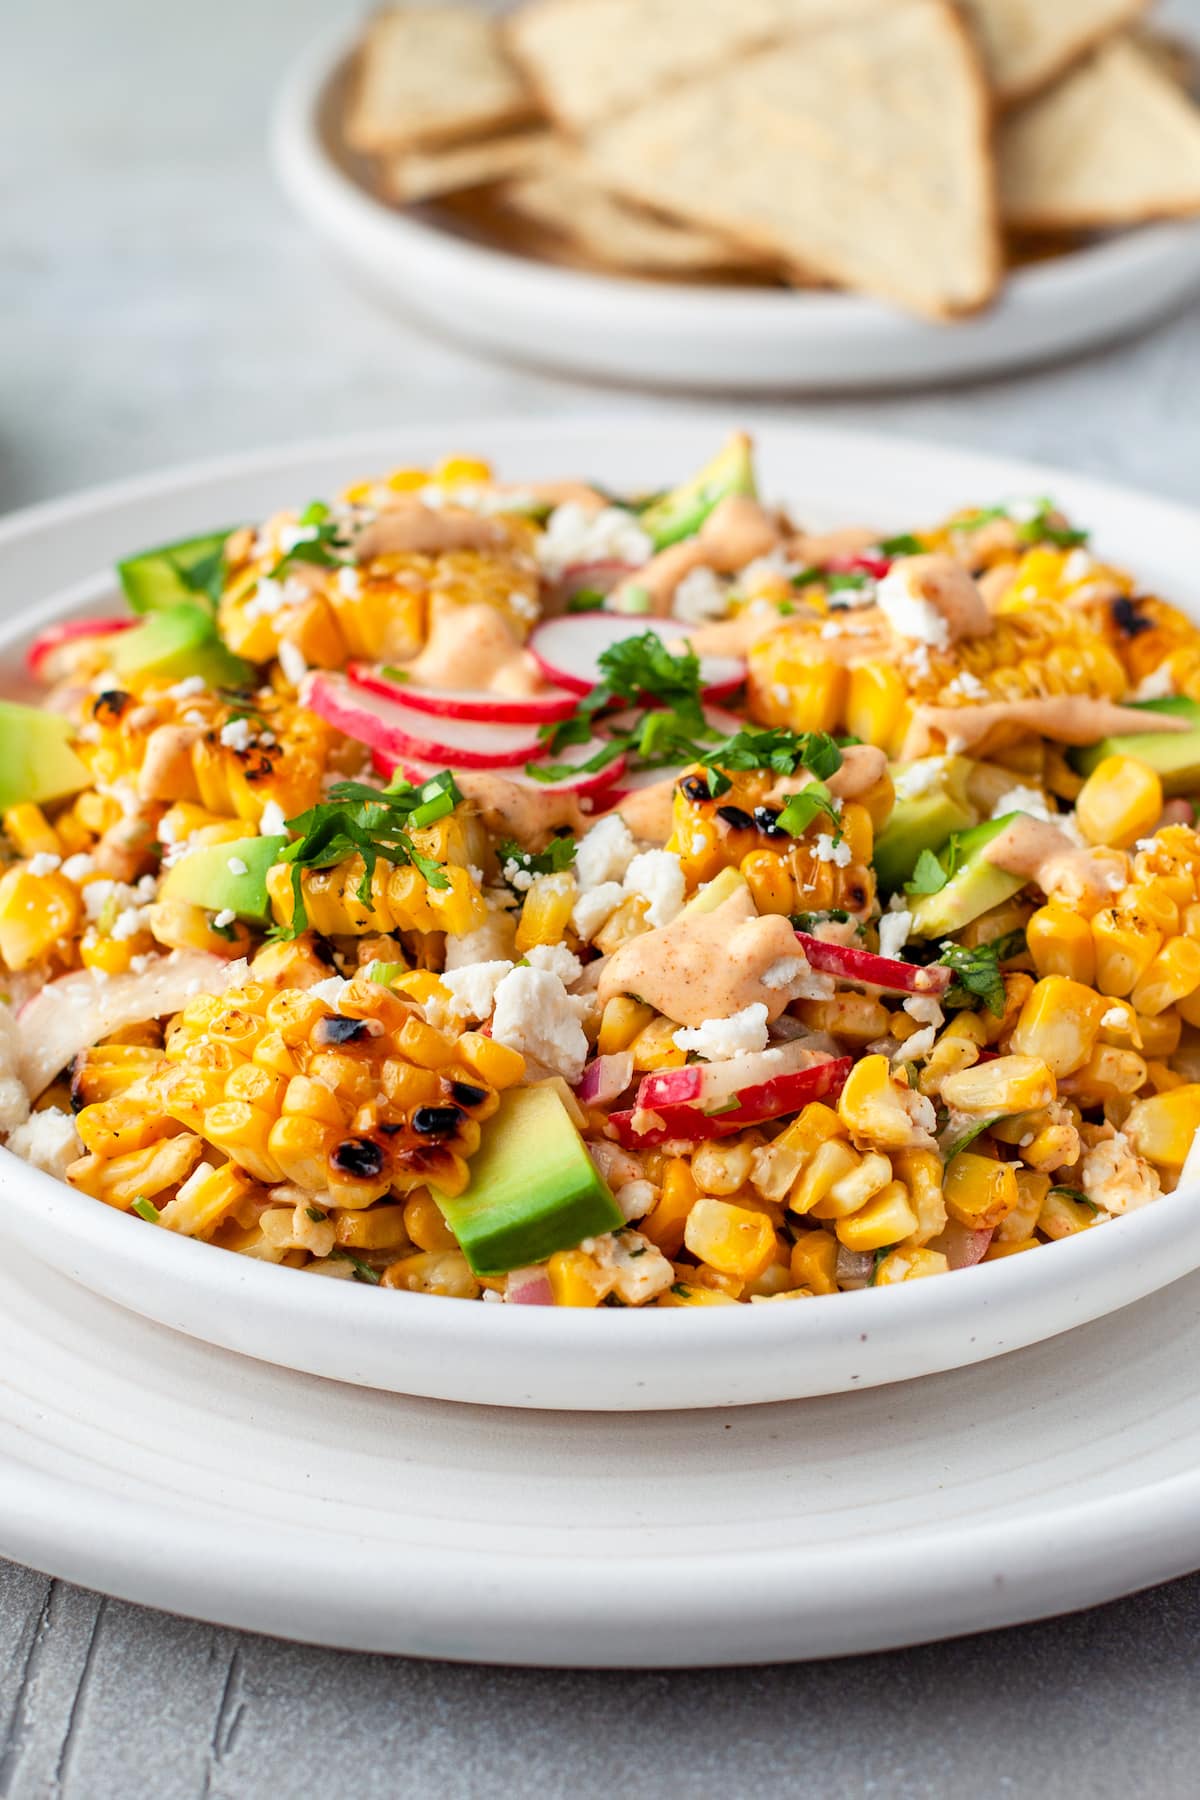 a large plate with Mexican Corn Salad that has corn, radishes, herbs, cheese, and creamy dressing